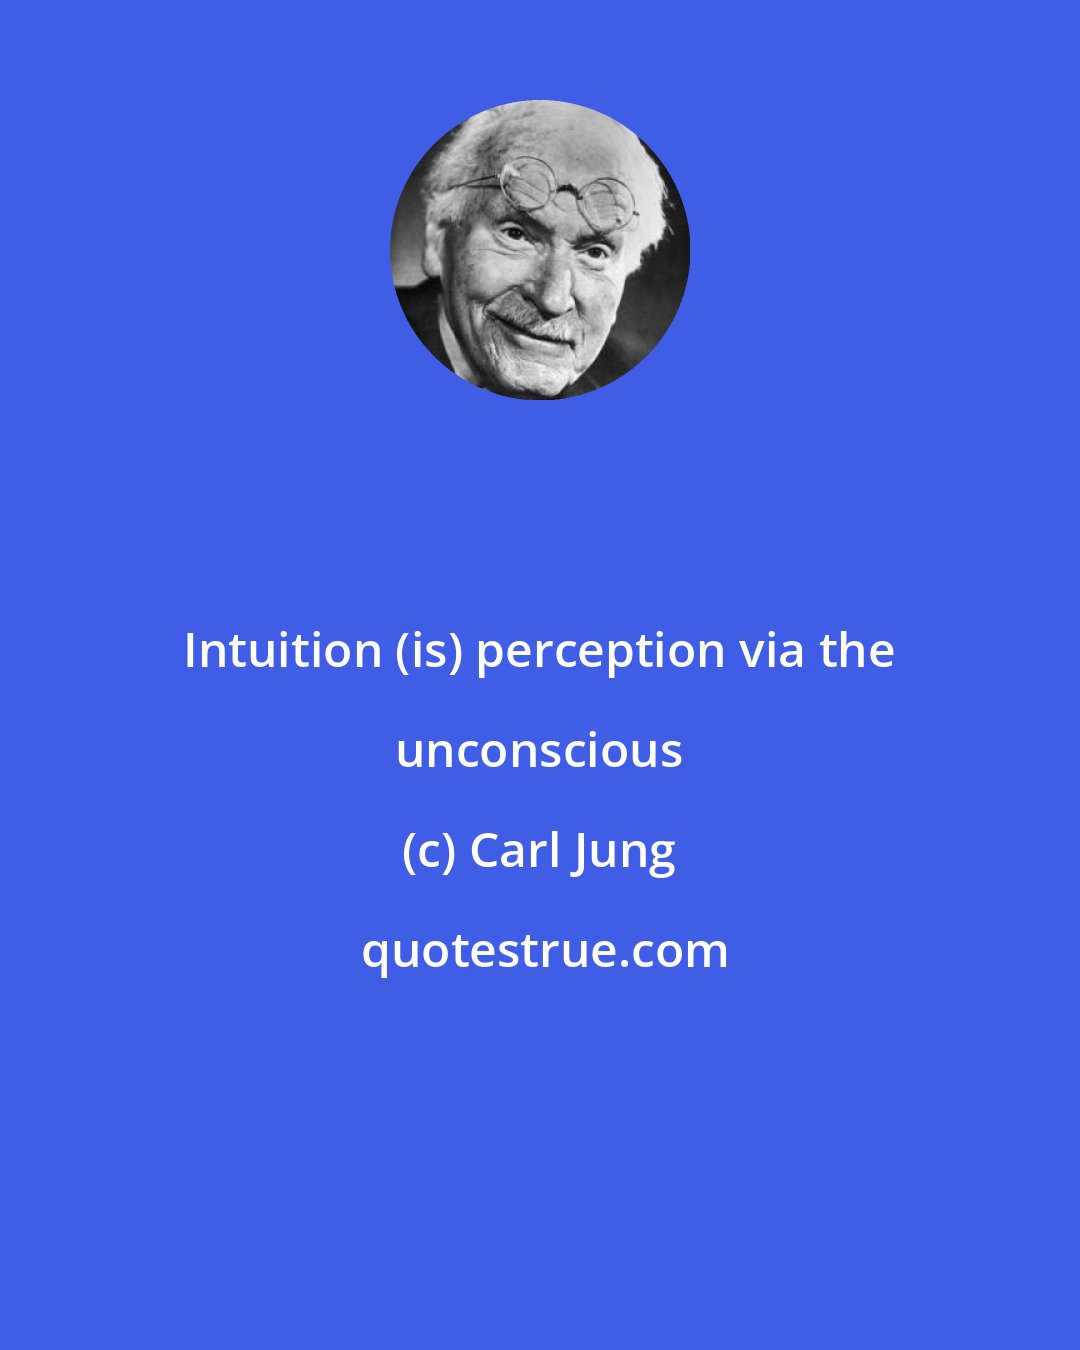 Carl Jung: Intuition (is) perception via the unconscious